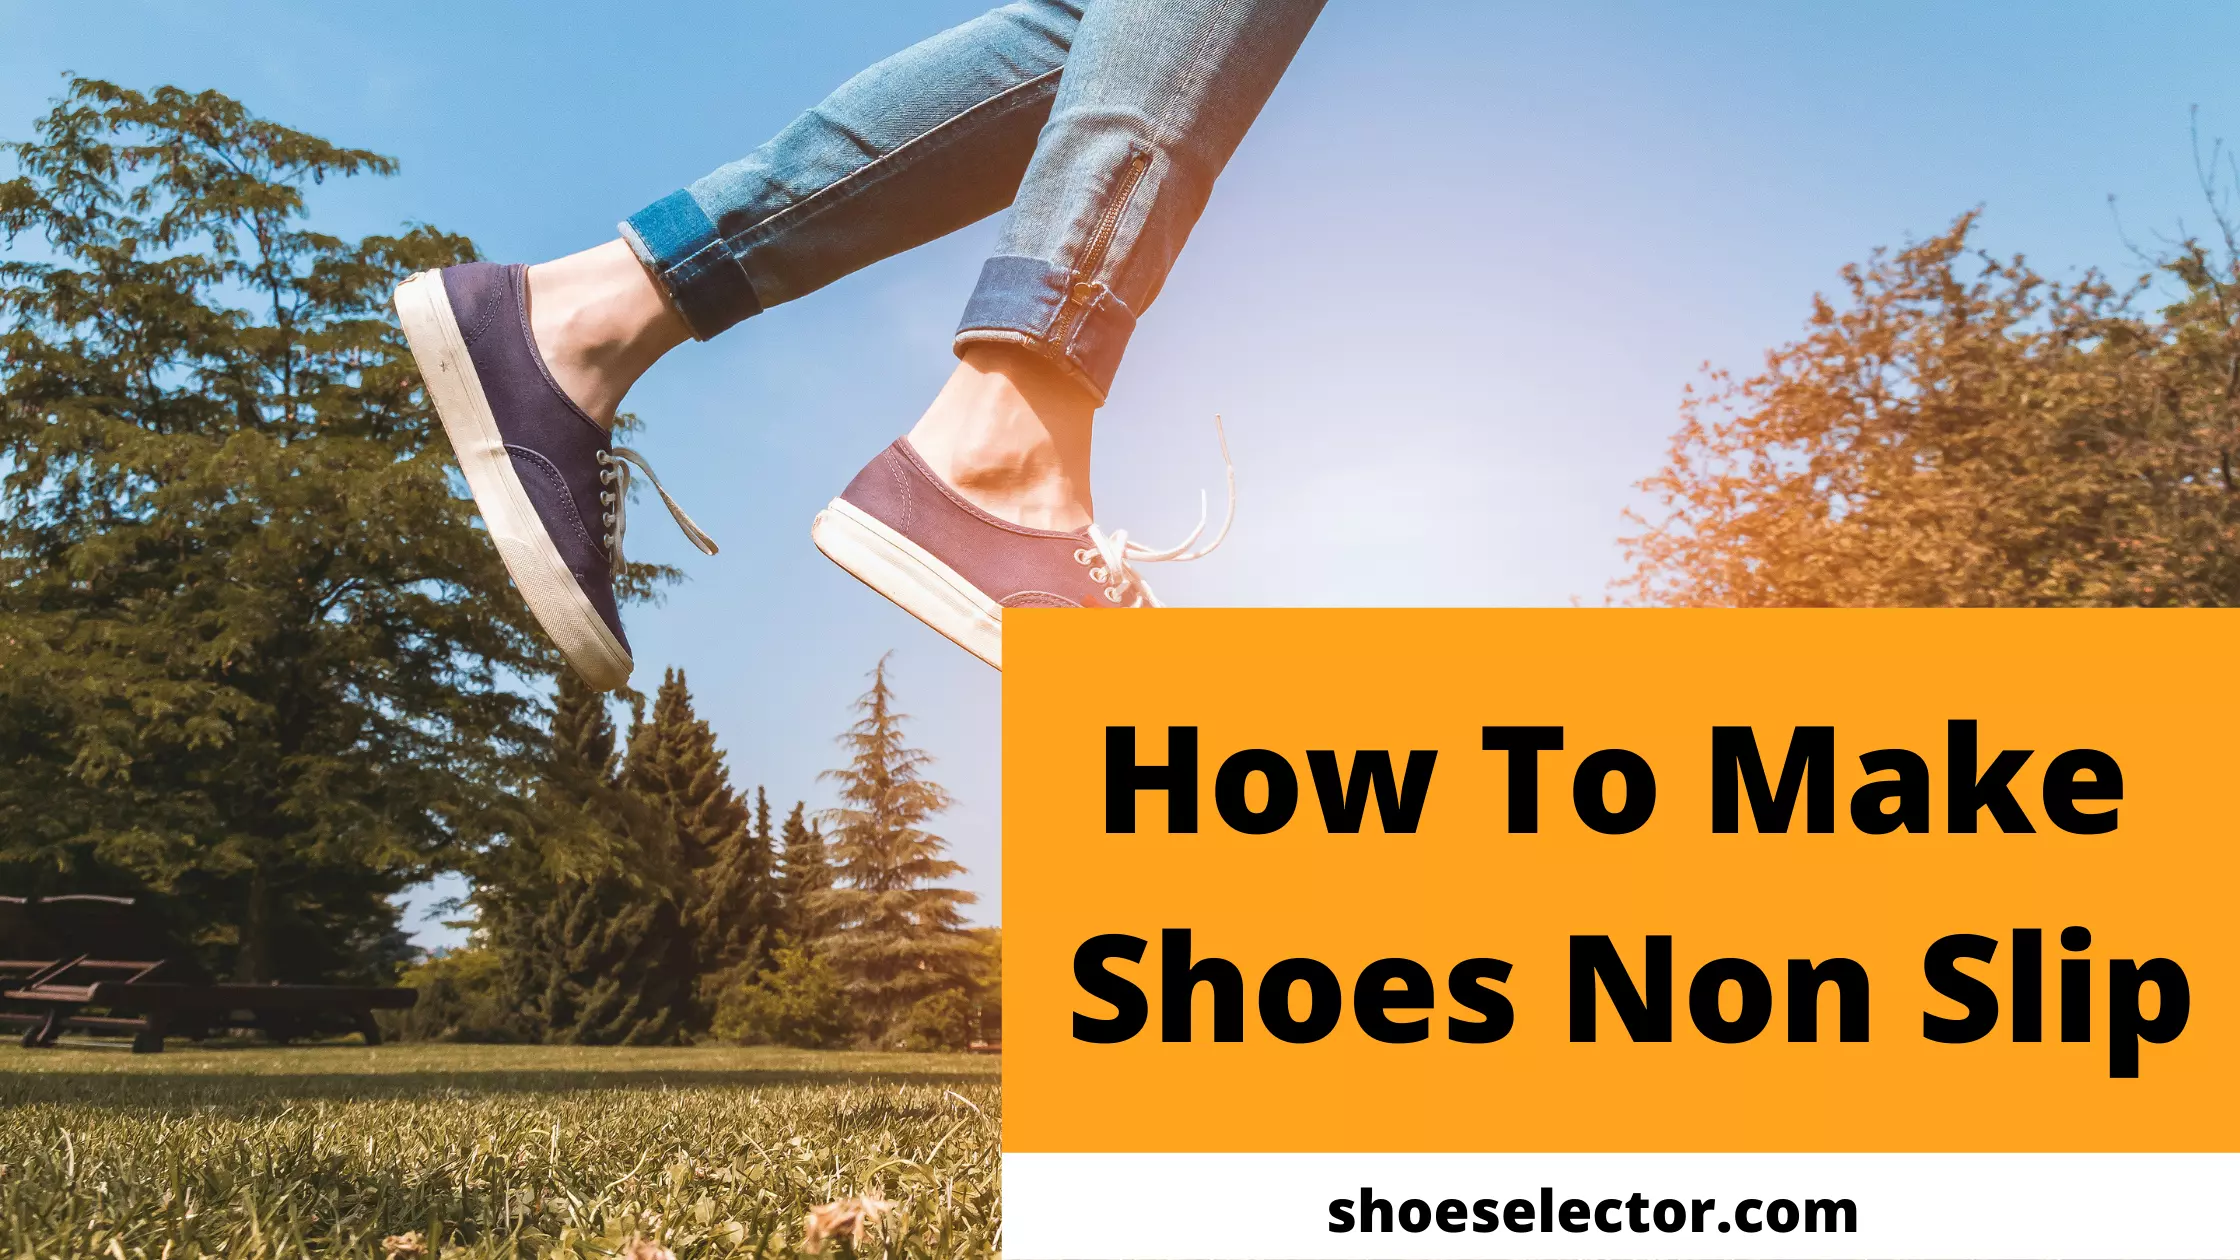 How to Make Shoes Non Slip - Recommended Guide